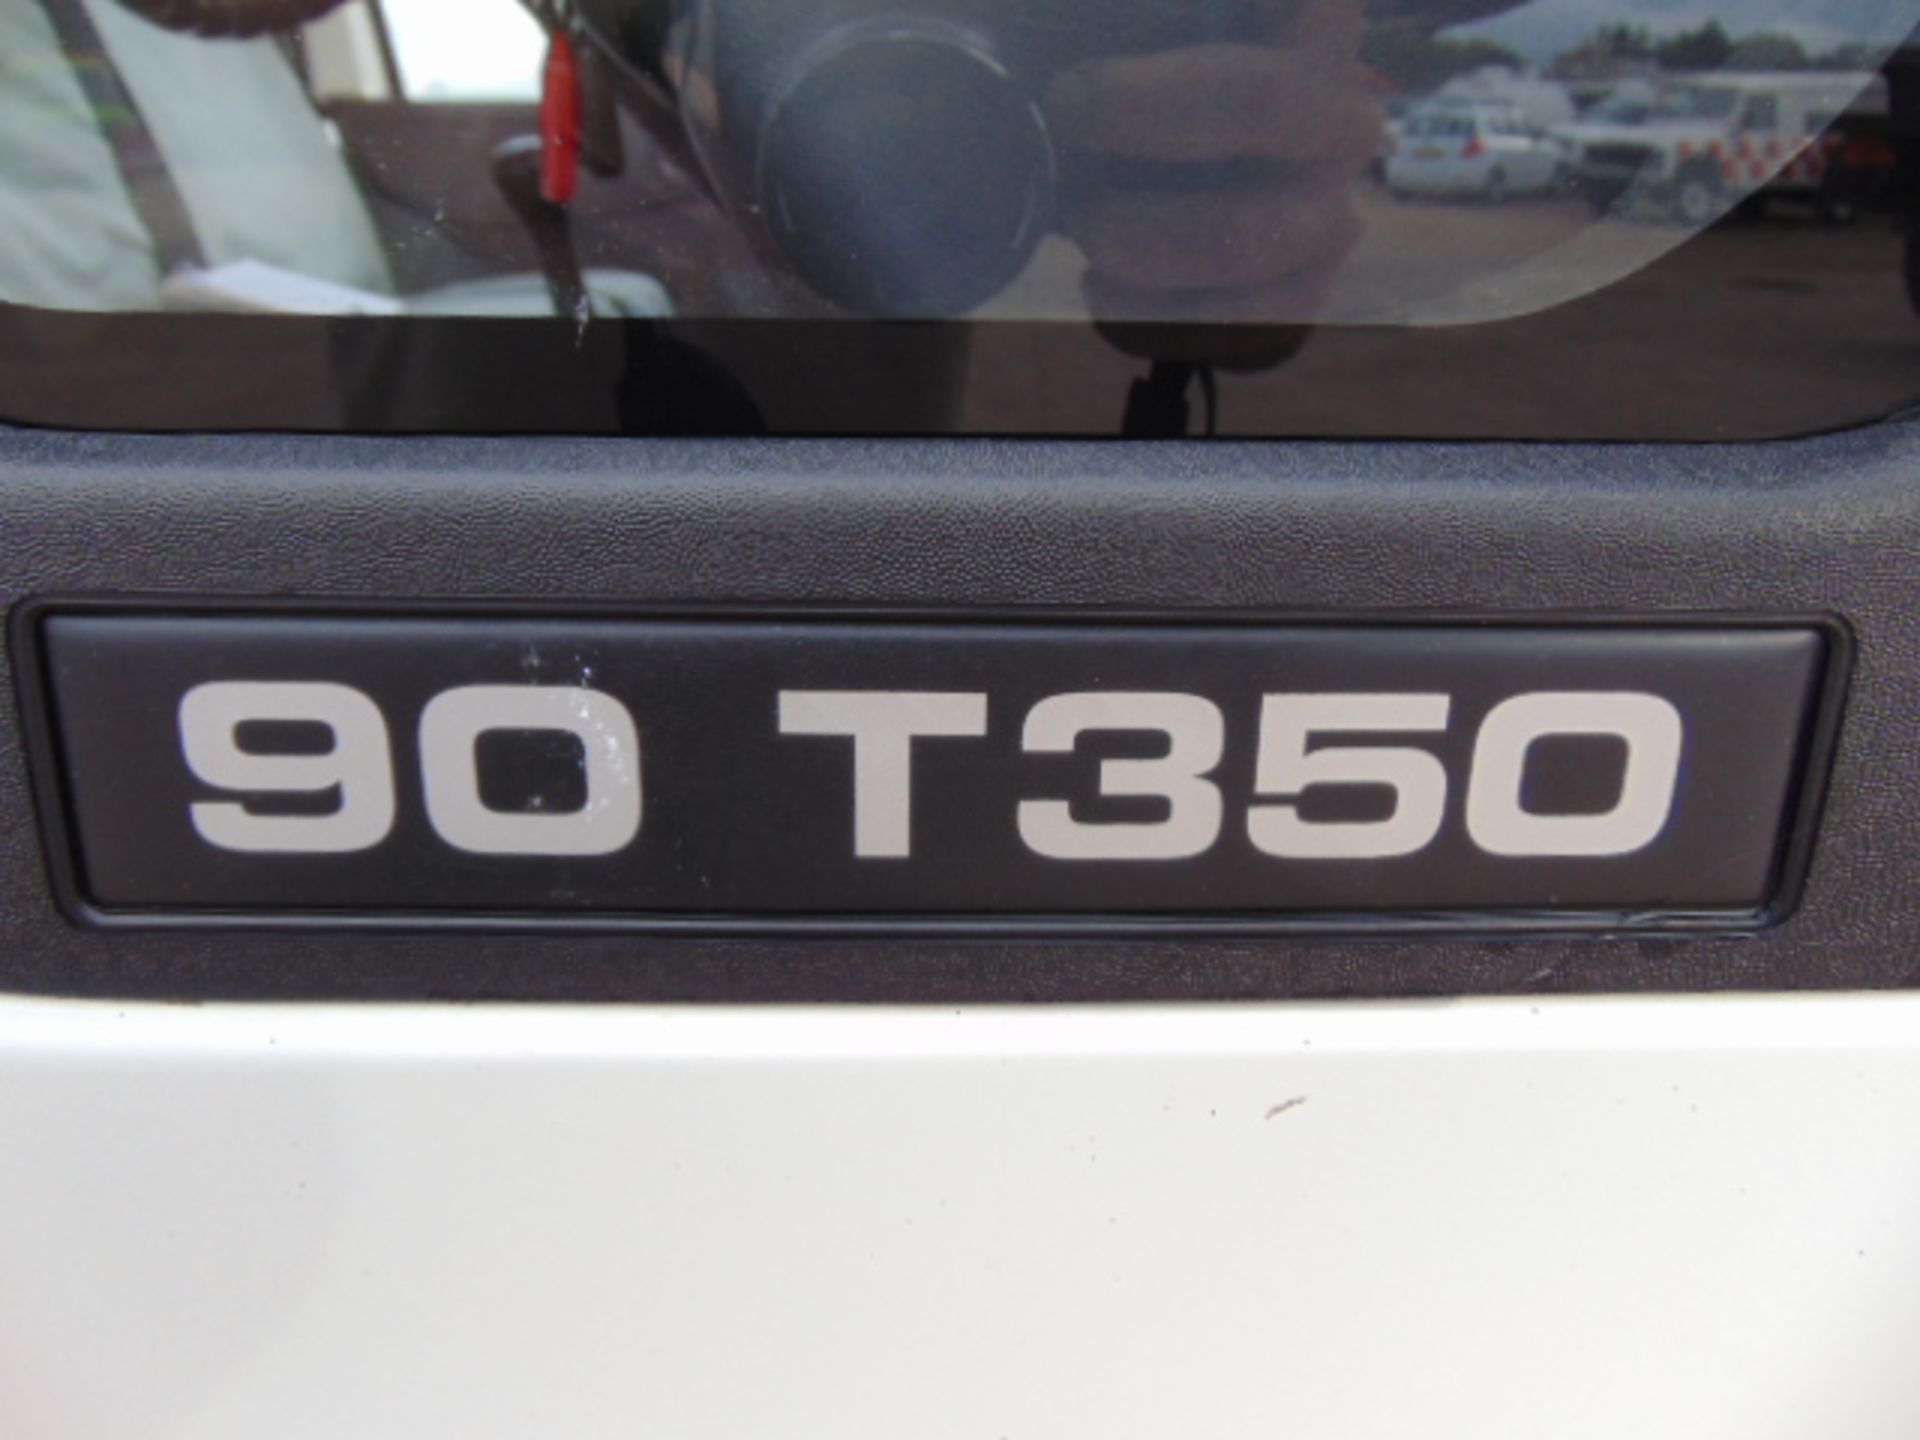 2005 Ford Transit 90 T350 Dropside Pickup 57,131 miles - Image 18 of 18